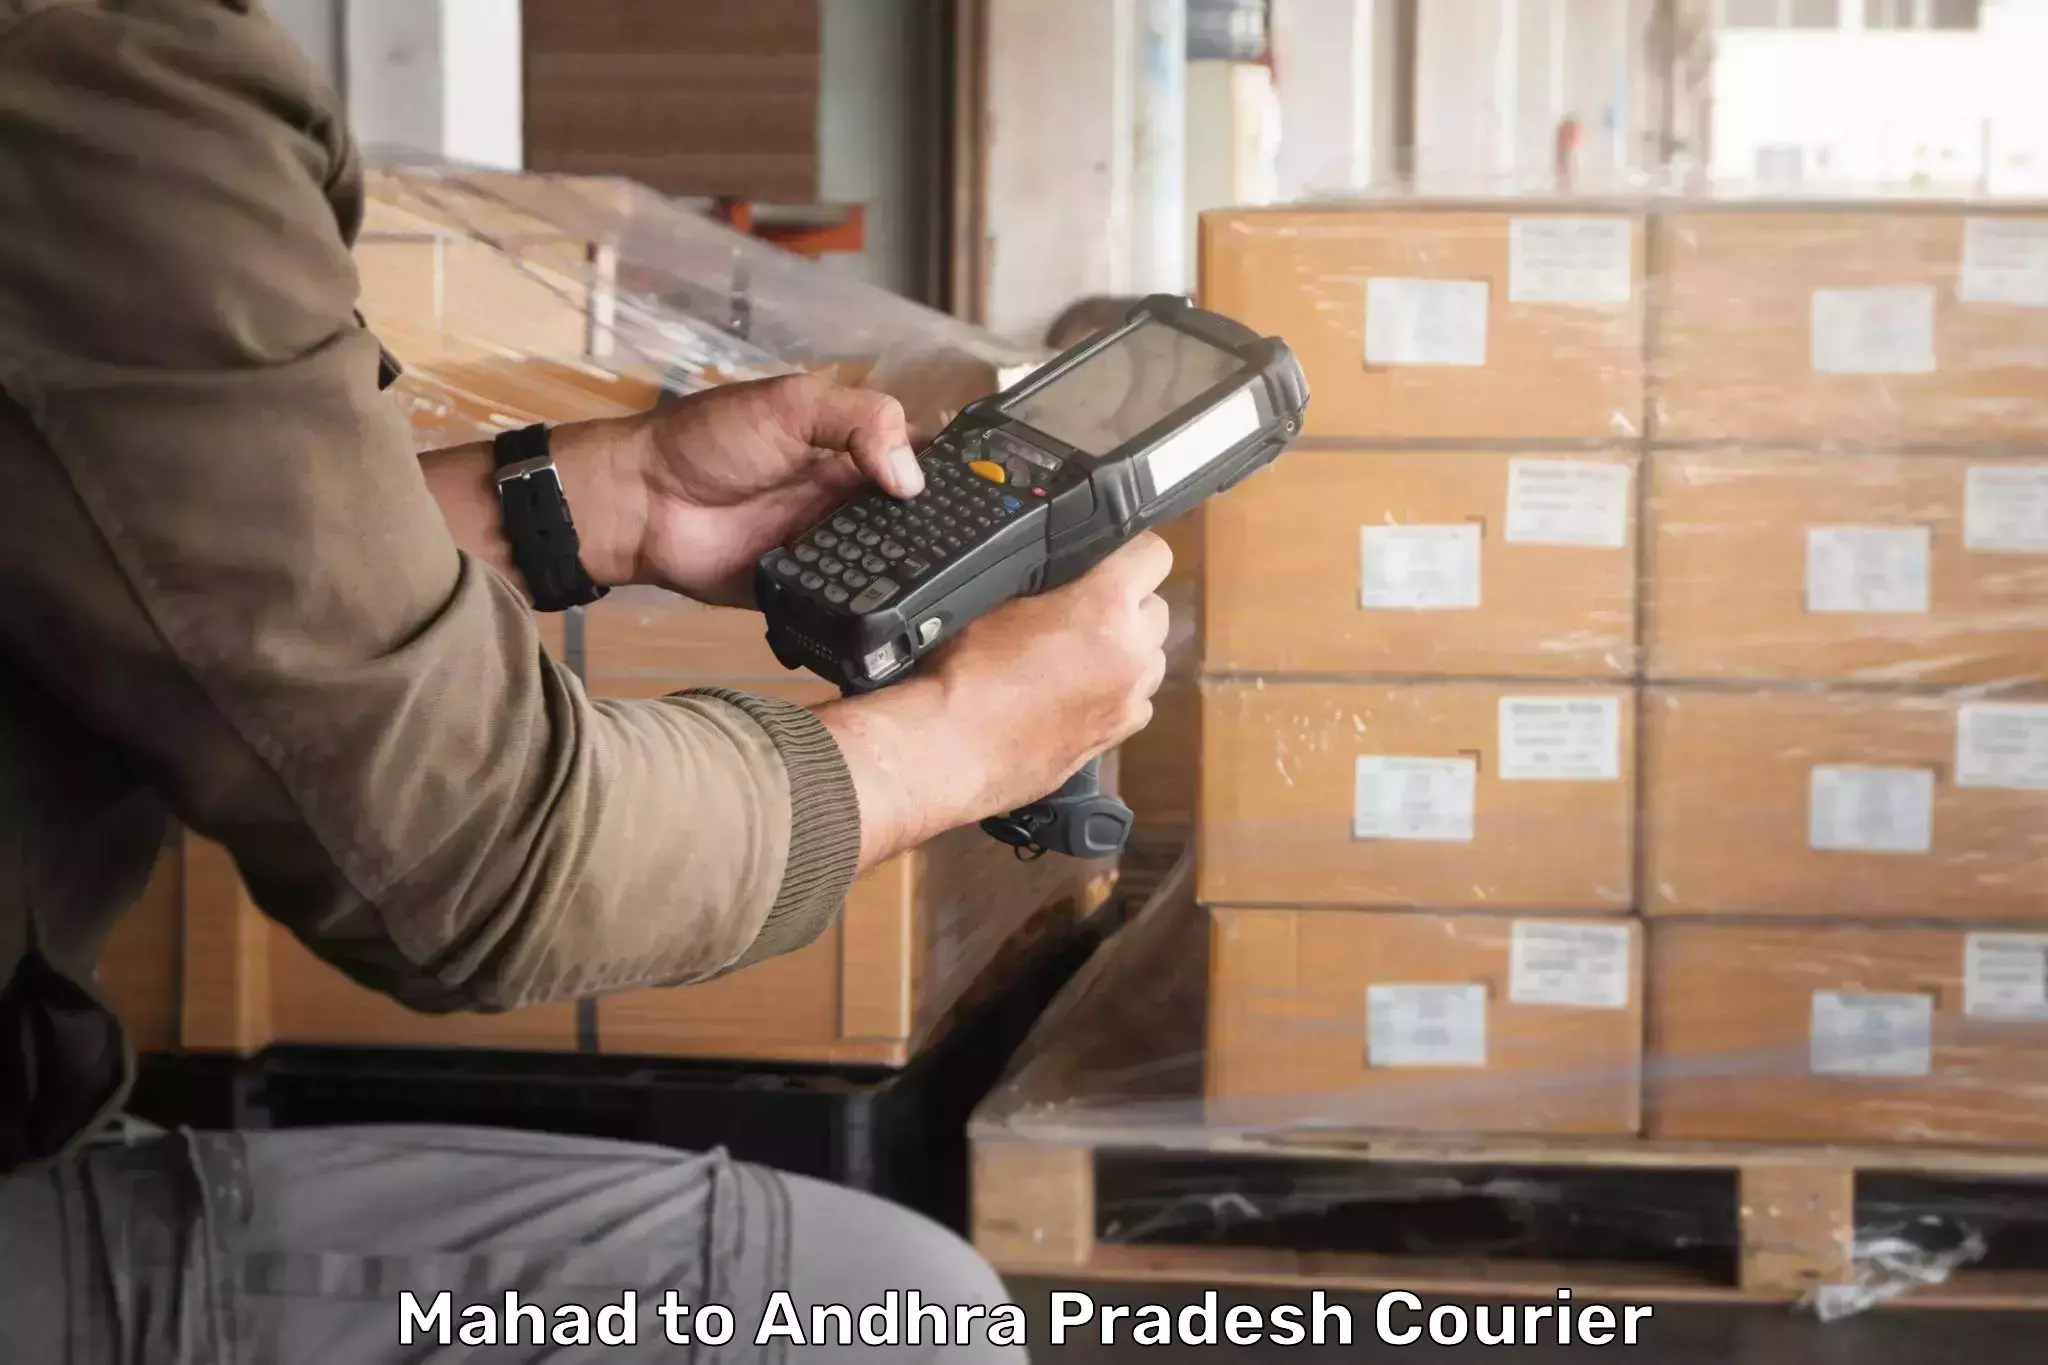 Reliable courier service in Mahad to Gopalapuram